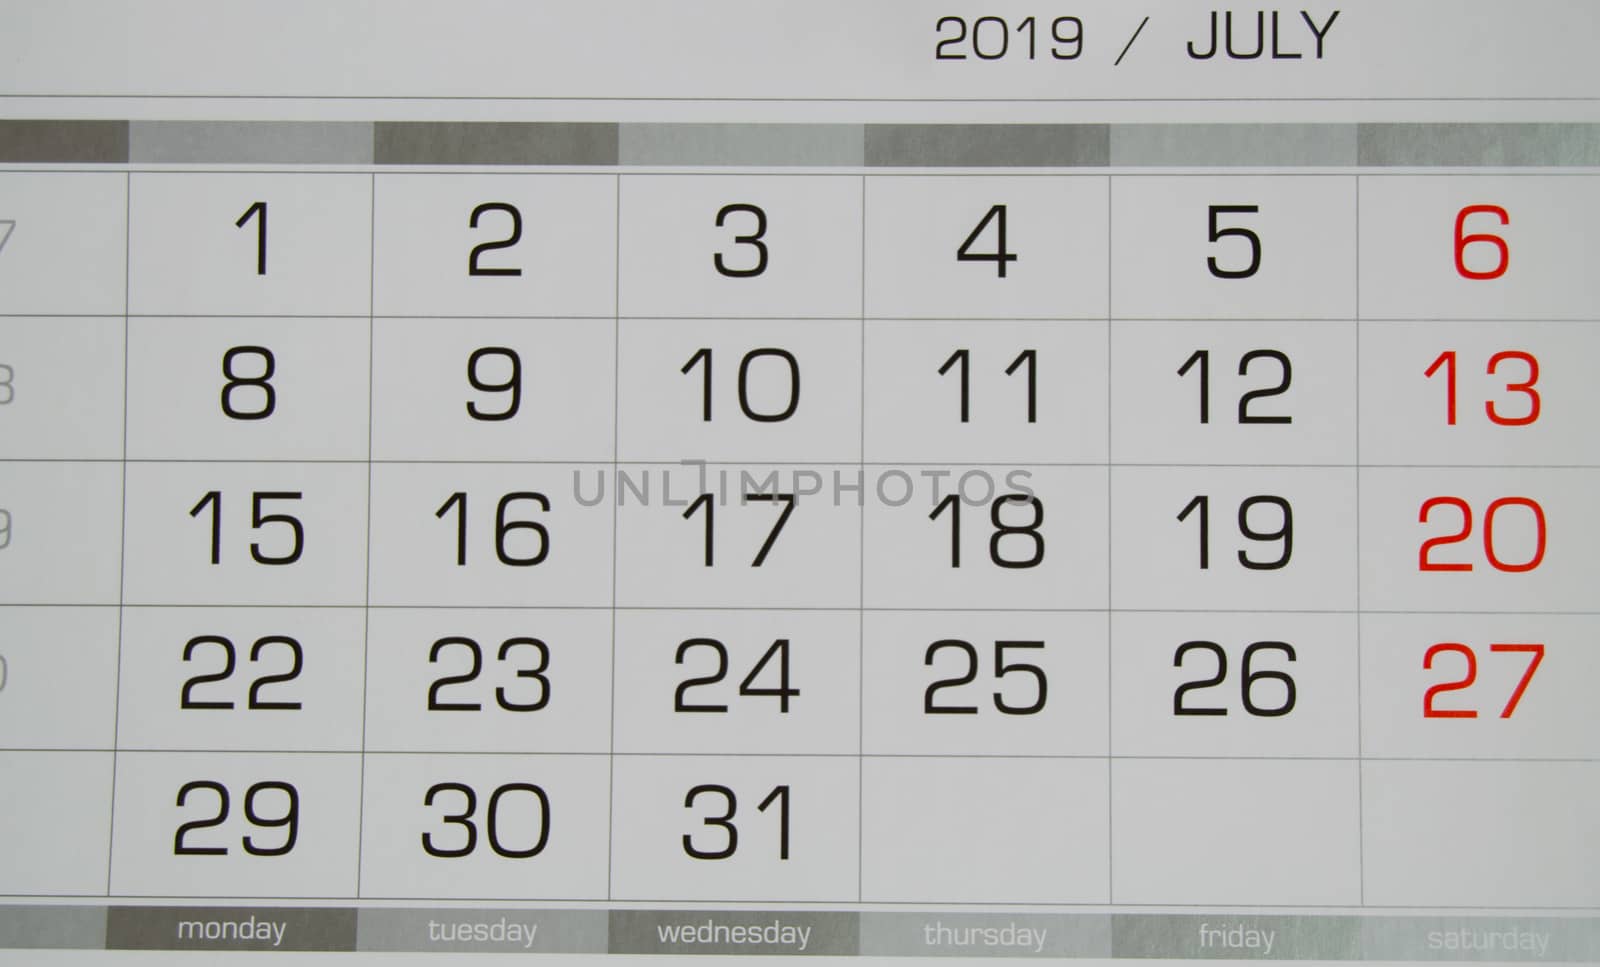 Calendar July 2019 with working days and weekends, close-up top view.